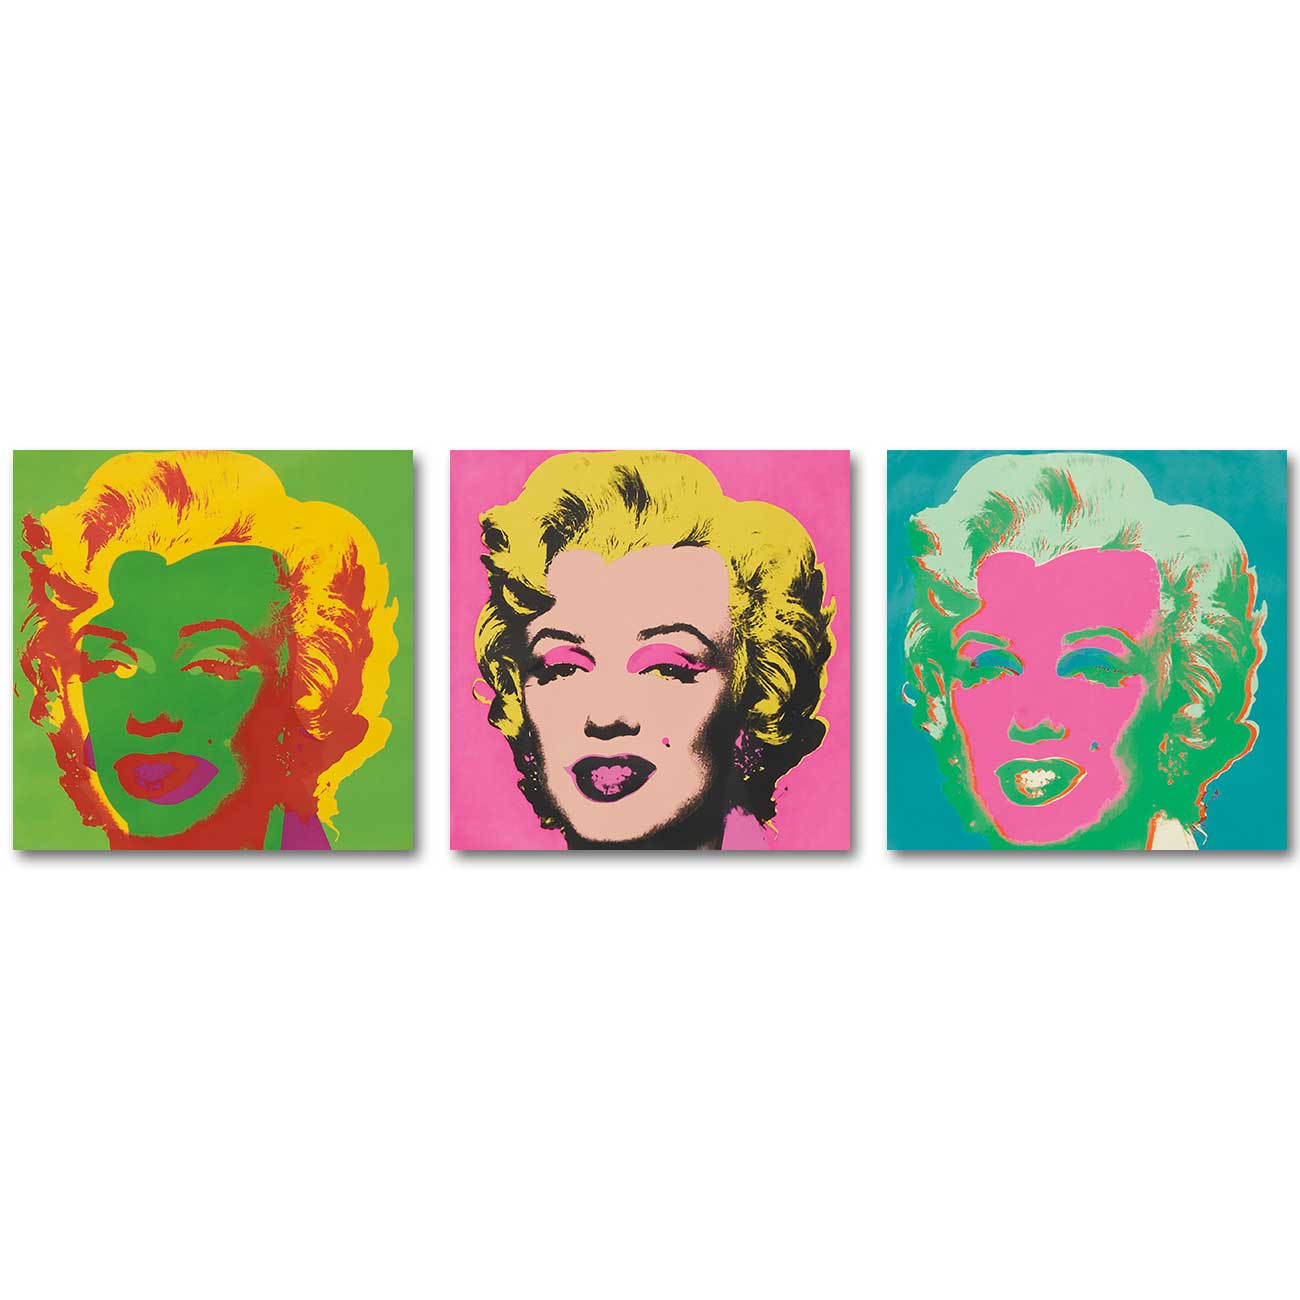 FAUX PICTURE ANDY WARHOL MARILYN MONROE FRAME STICKER POP WALL ART BAROQUE STYLE 